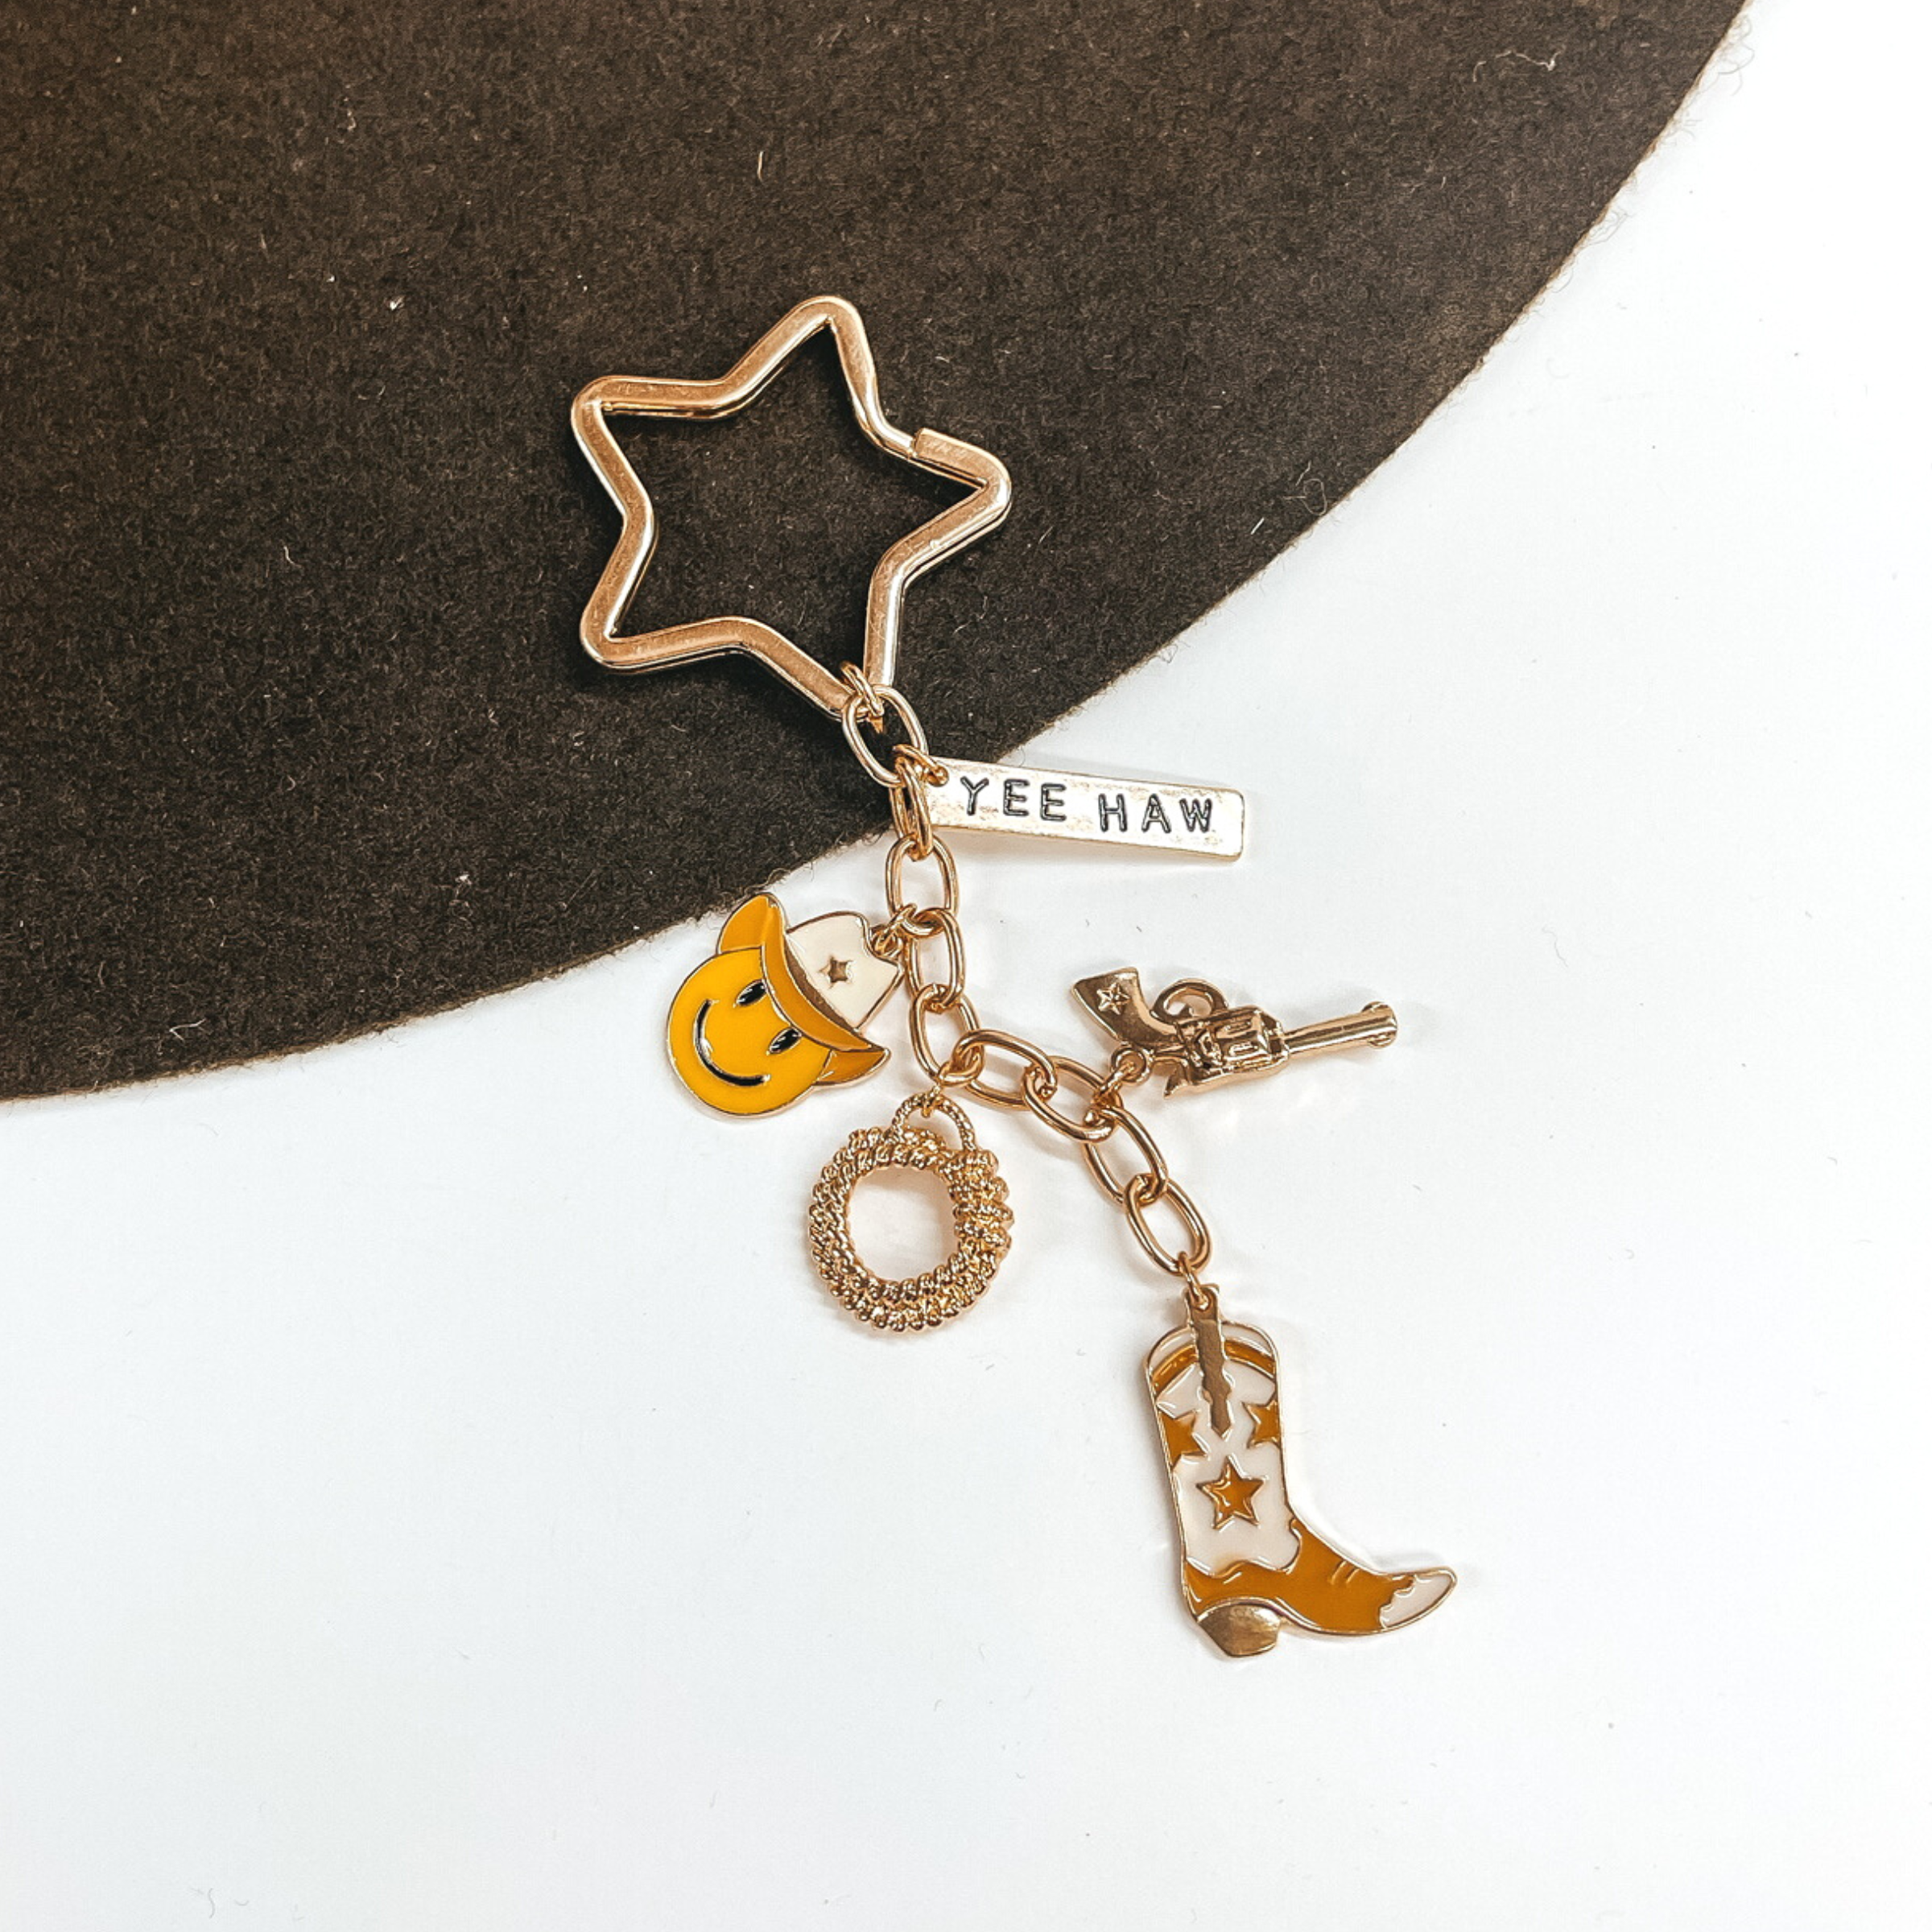 Gold, star shaped key ring with a hanging gold chain with charms on it. There is a gold rectangle charm with the words "YEE HAW," a gold gun charm, a gold rope charm, a yellow smiley face chram with a ivory cowboy hat, and an ivory and tan cowboy boot charm. This is pictured on a brown and white background. 